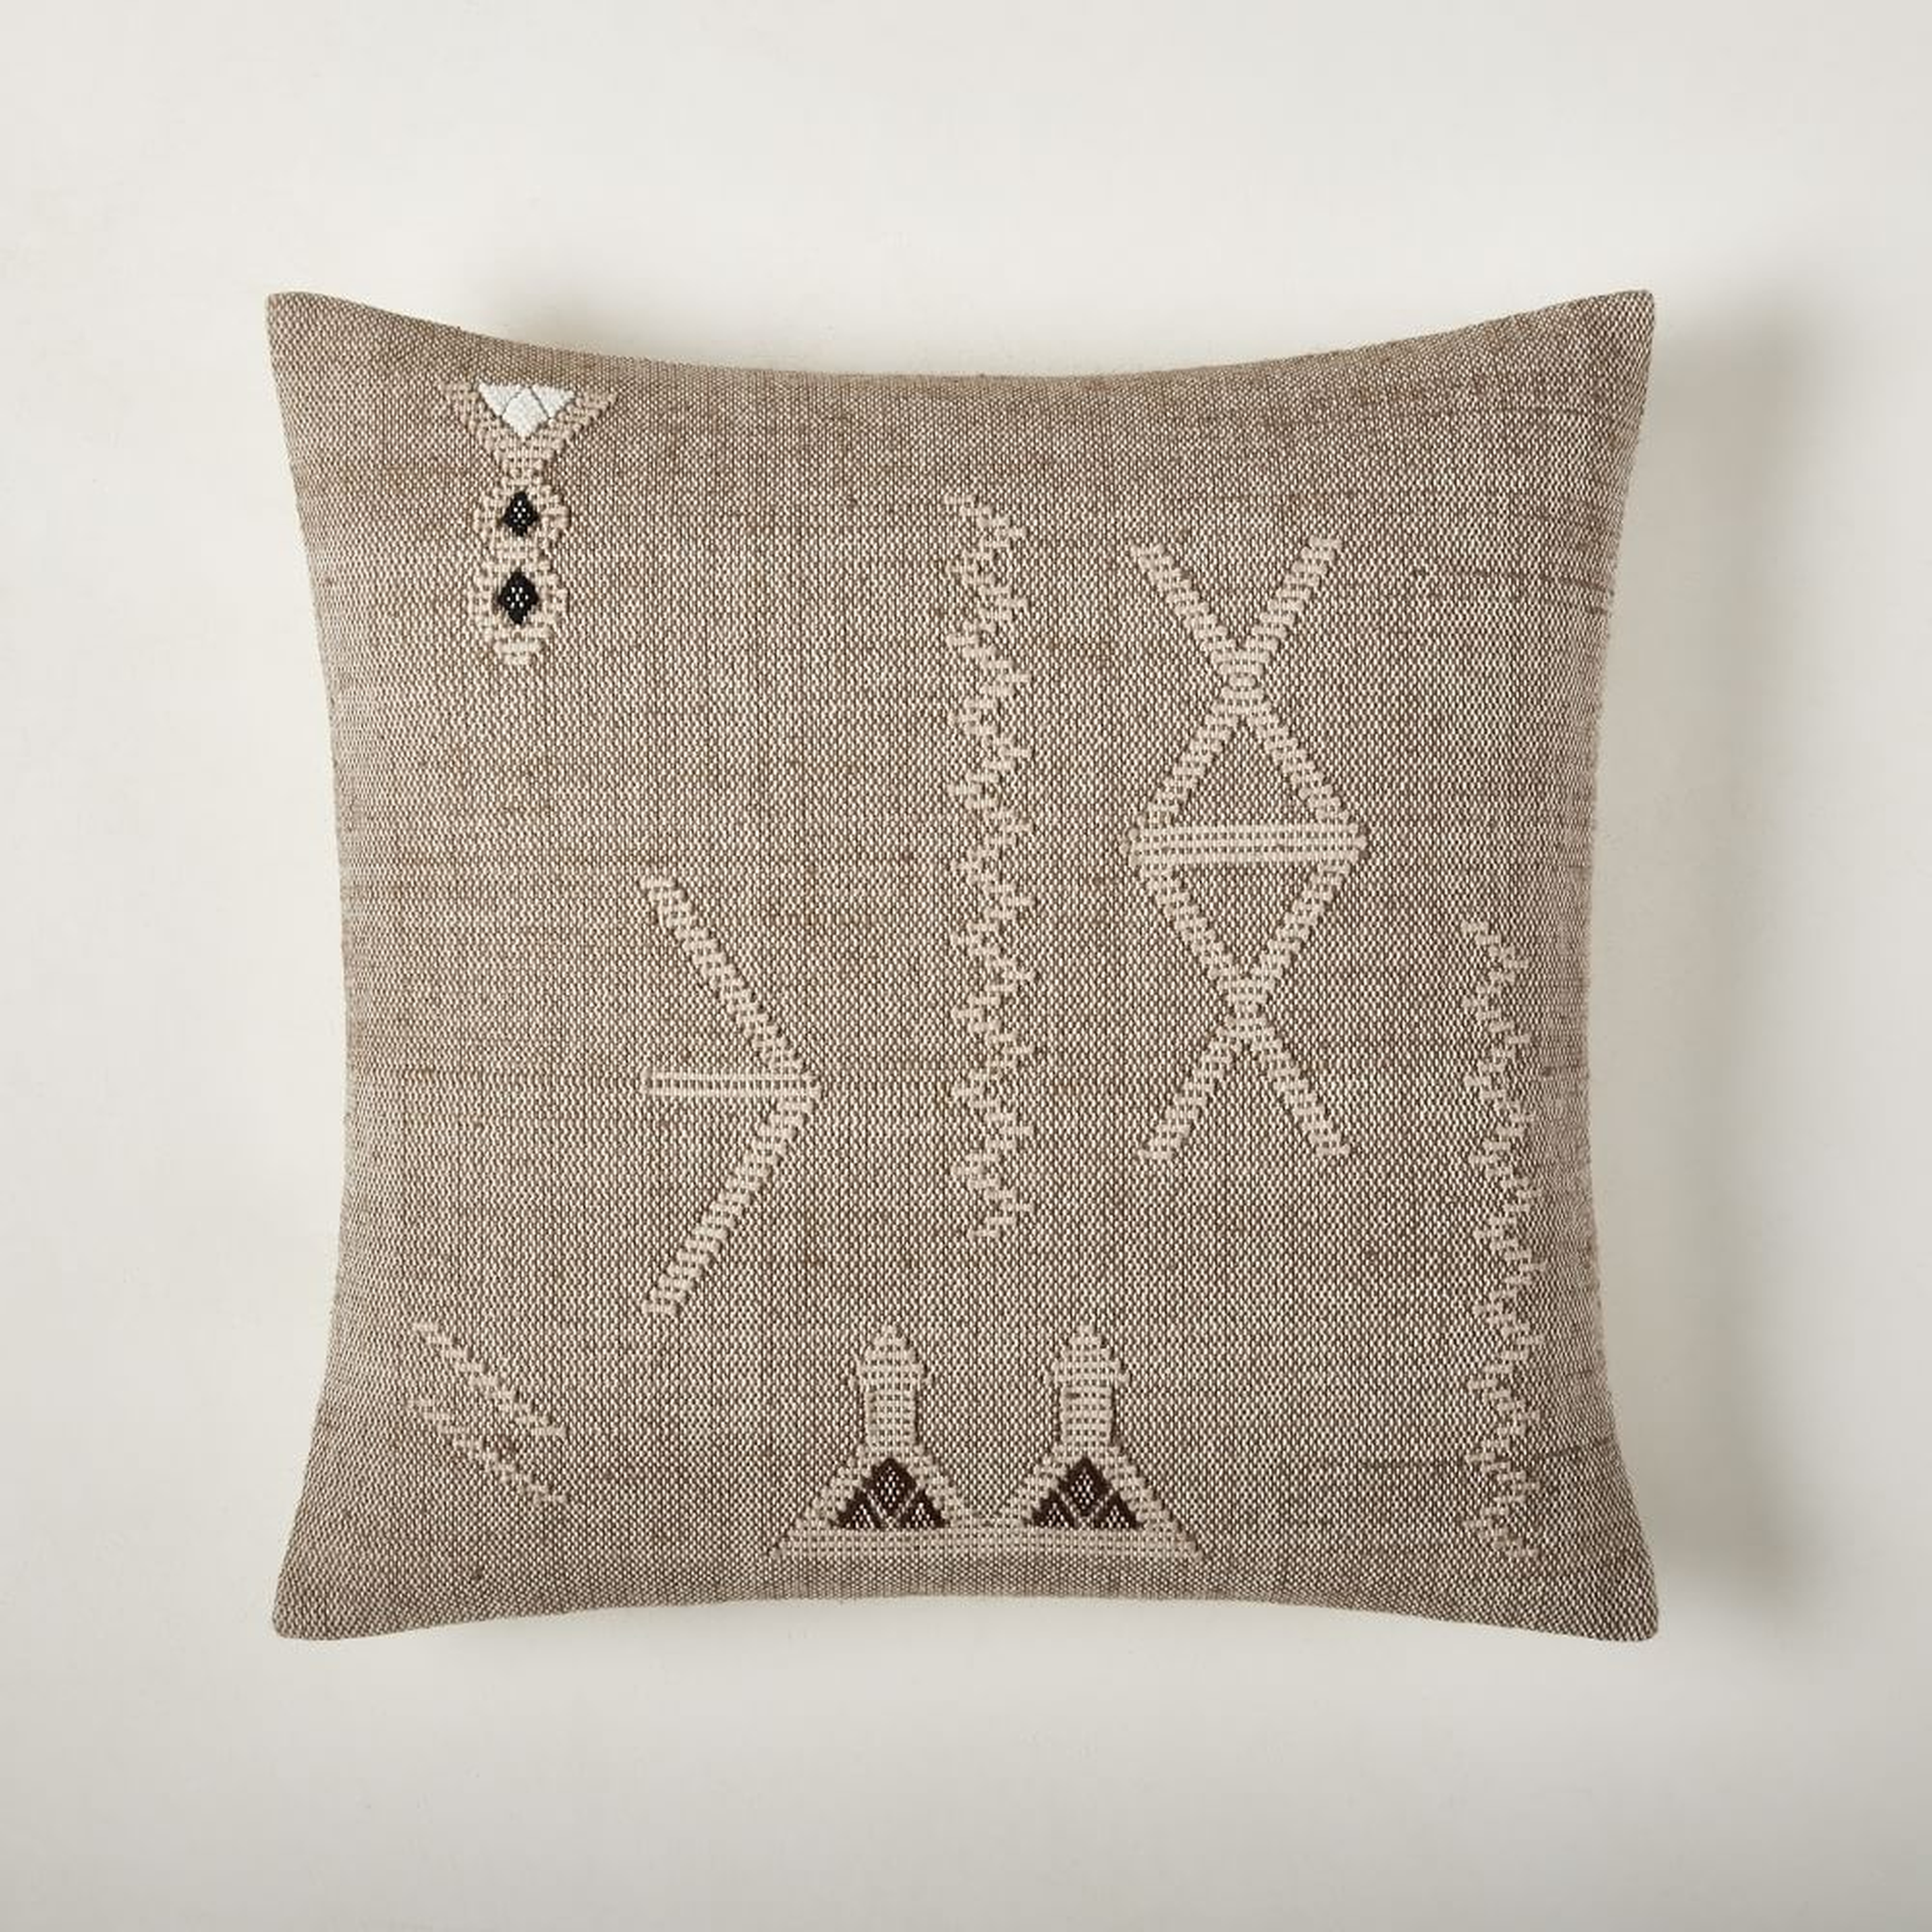 Minimal Moroccan Woven Pillow Cover, 20"x20", Mocha, Set of 2 - West Elm